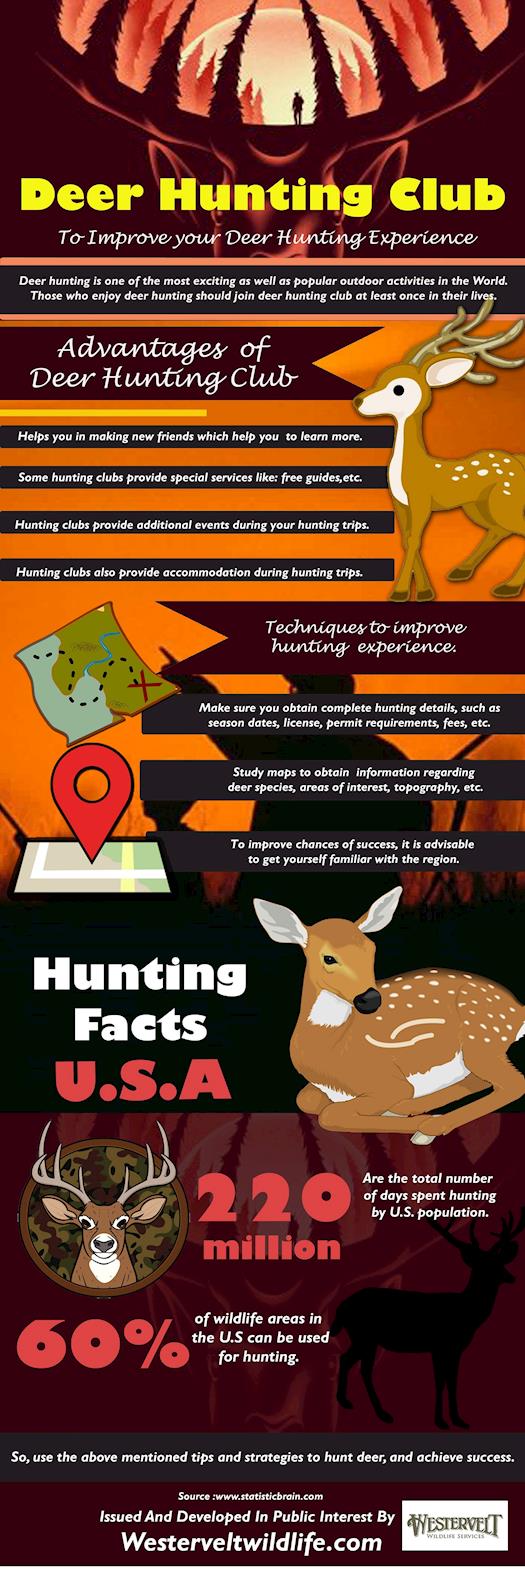 Deer hunting clubs to Improve your Deer Hunting Experience